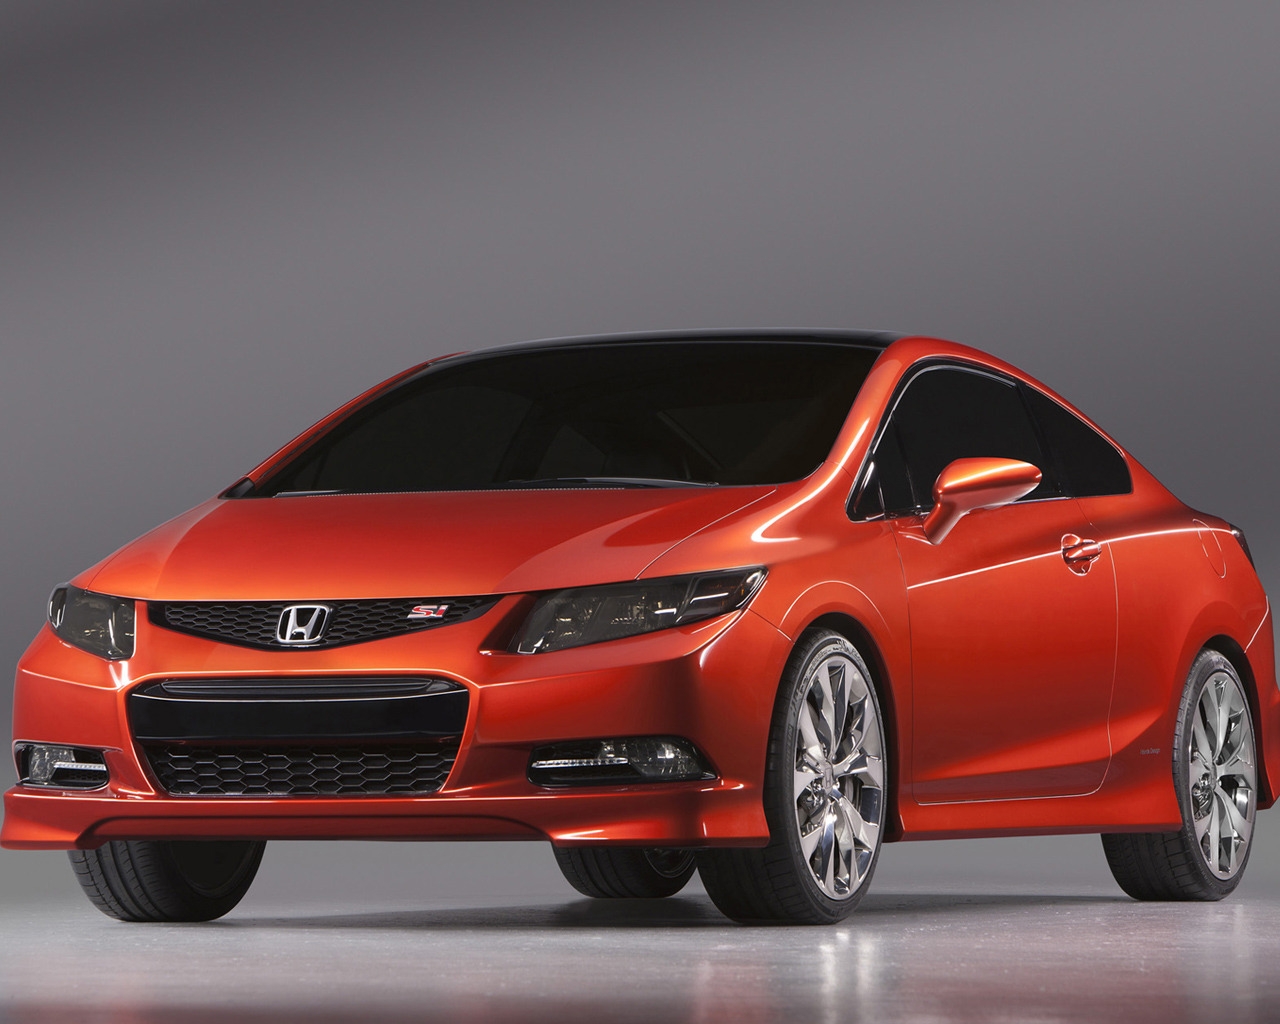 2011 Honda Civic Si Concept for 1280 x 1024 resolution